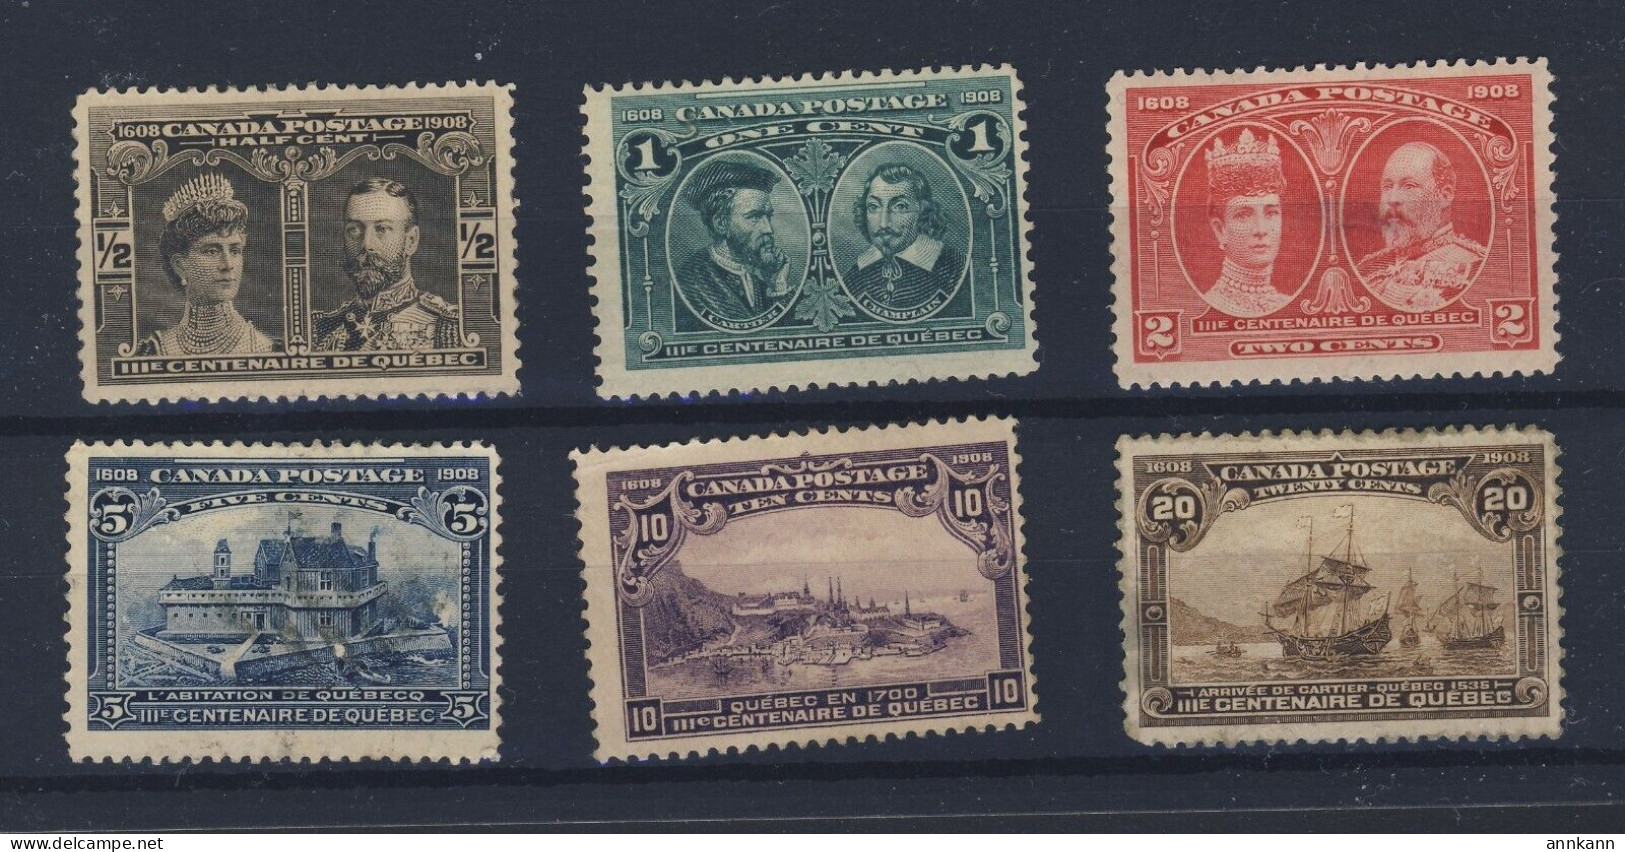 6x Canada 1908 Quebec Tercentenary Stamps: #96-97-98-99-101-103 *READ DESCRIPTION* GV=$357.00 - Used Stamps